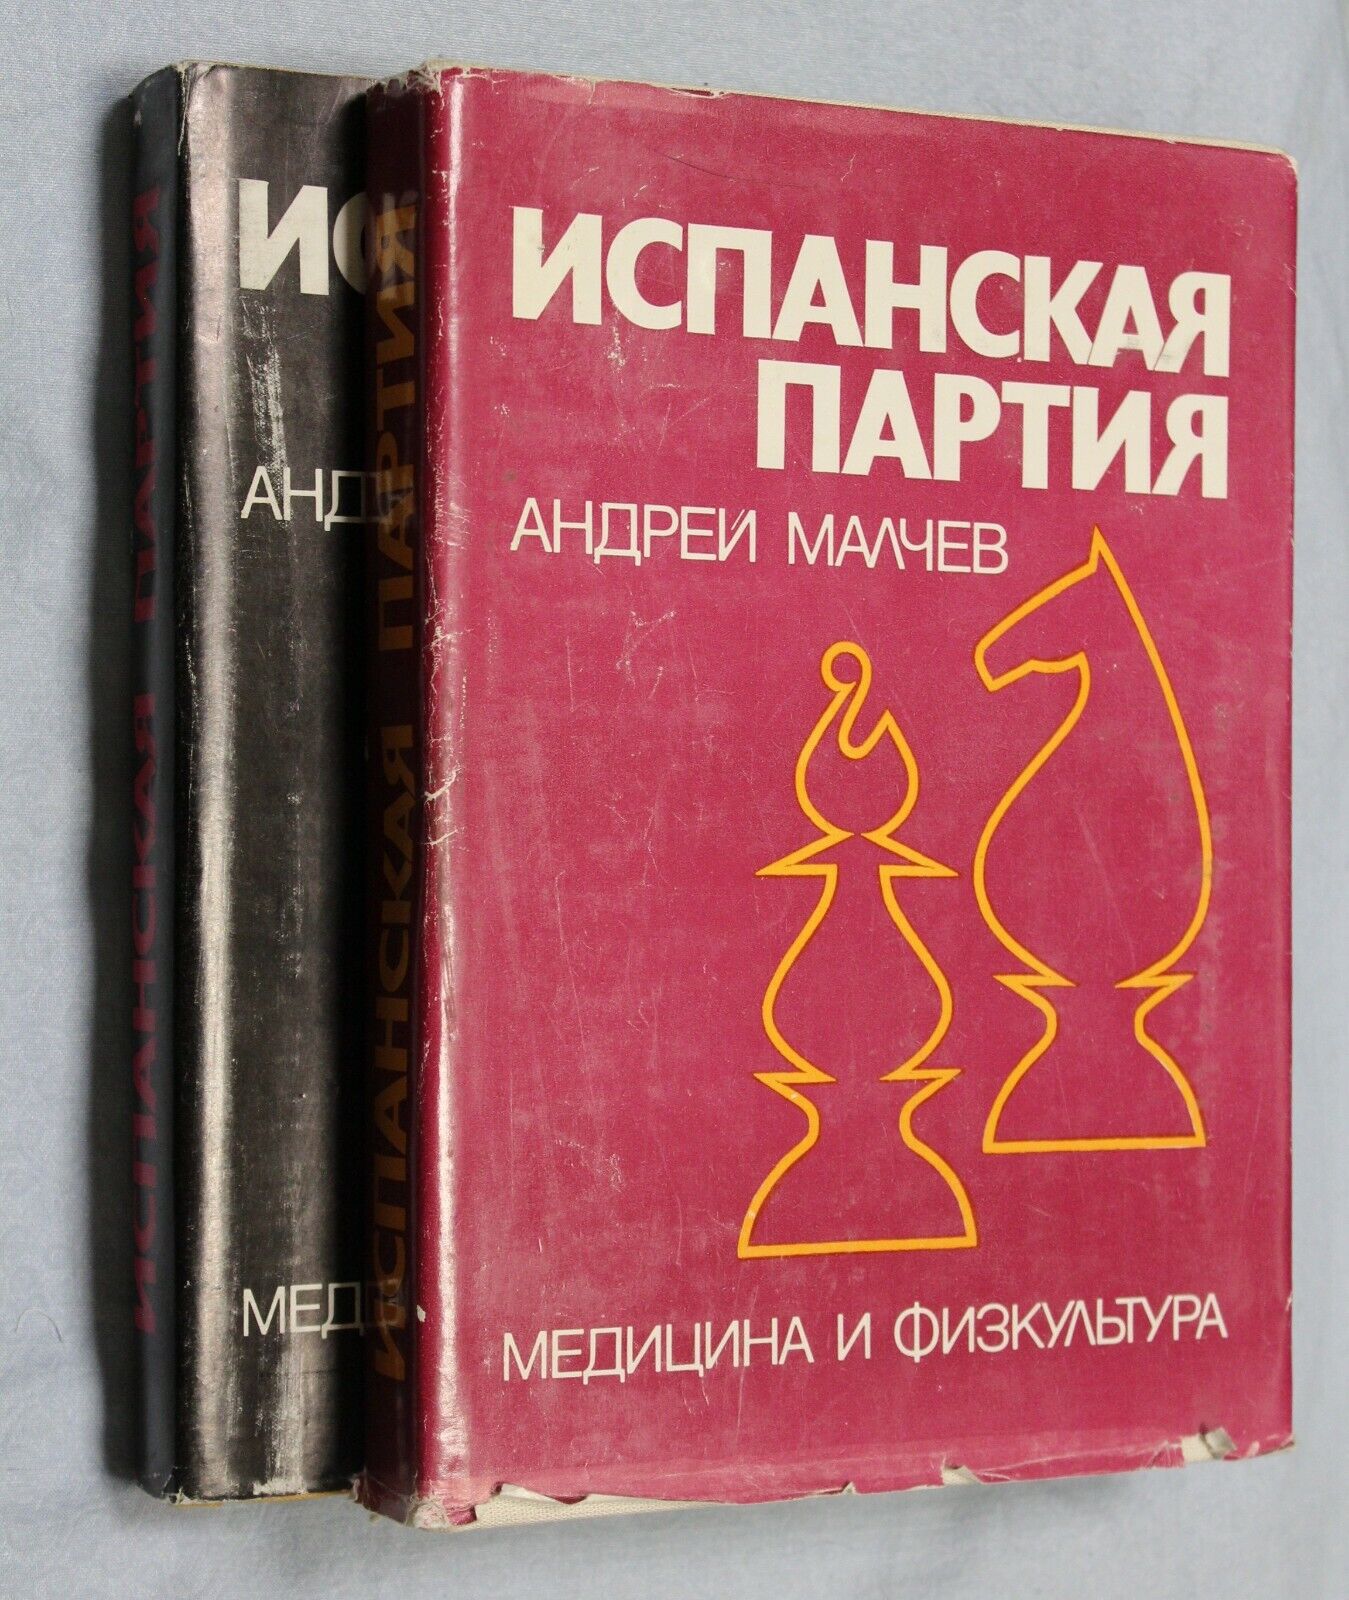 11113.Chess book: signed Author for Rochal, Spanish Party Two Volumes 1981